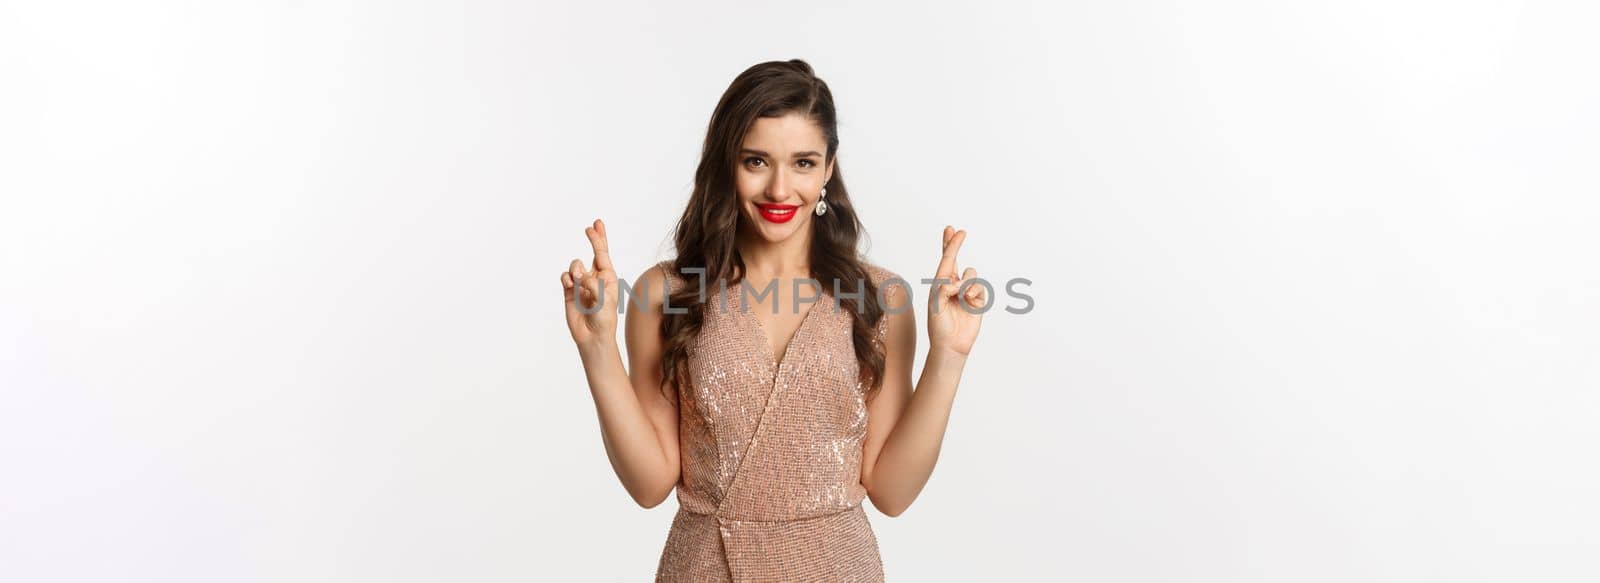 Concept of casino, celebration and party. Hopeful beautiful woman making a wish, cross fingers for good luck and looking confident, white background.